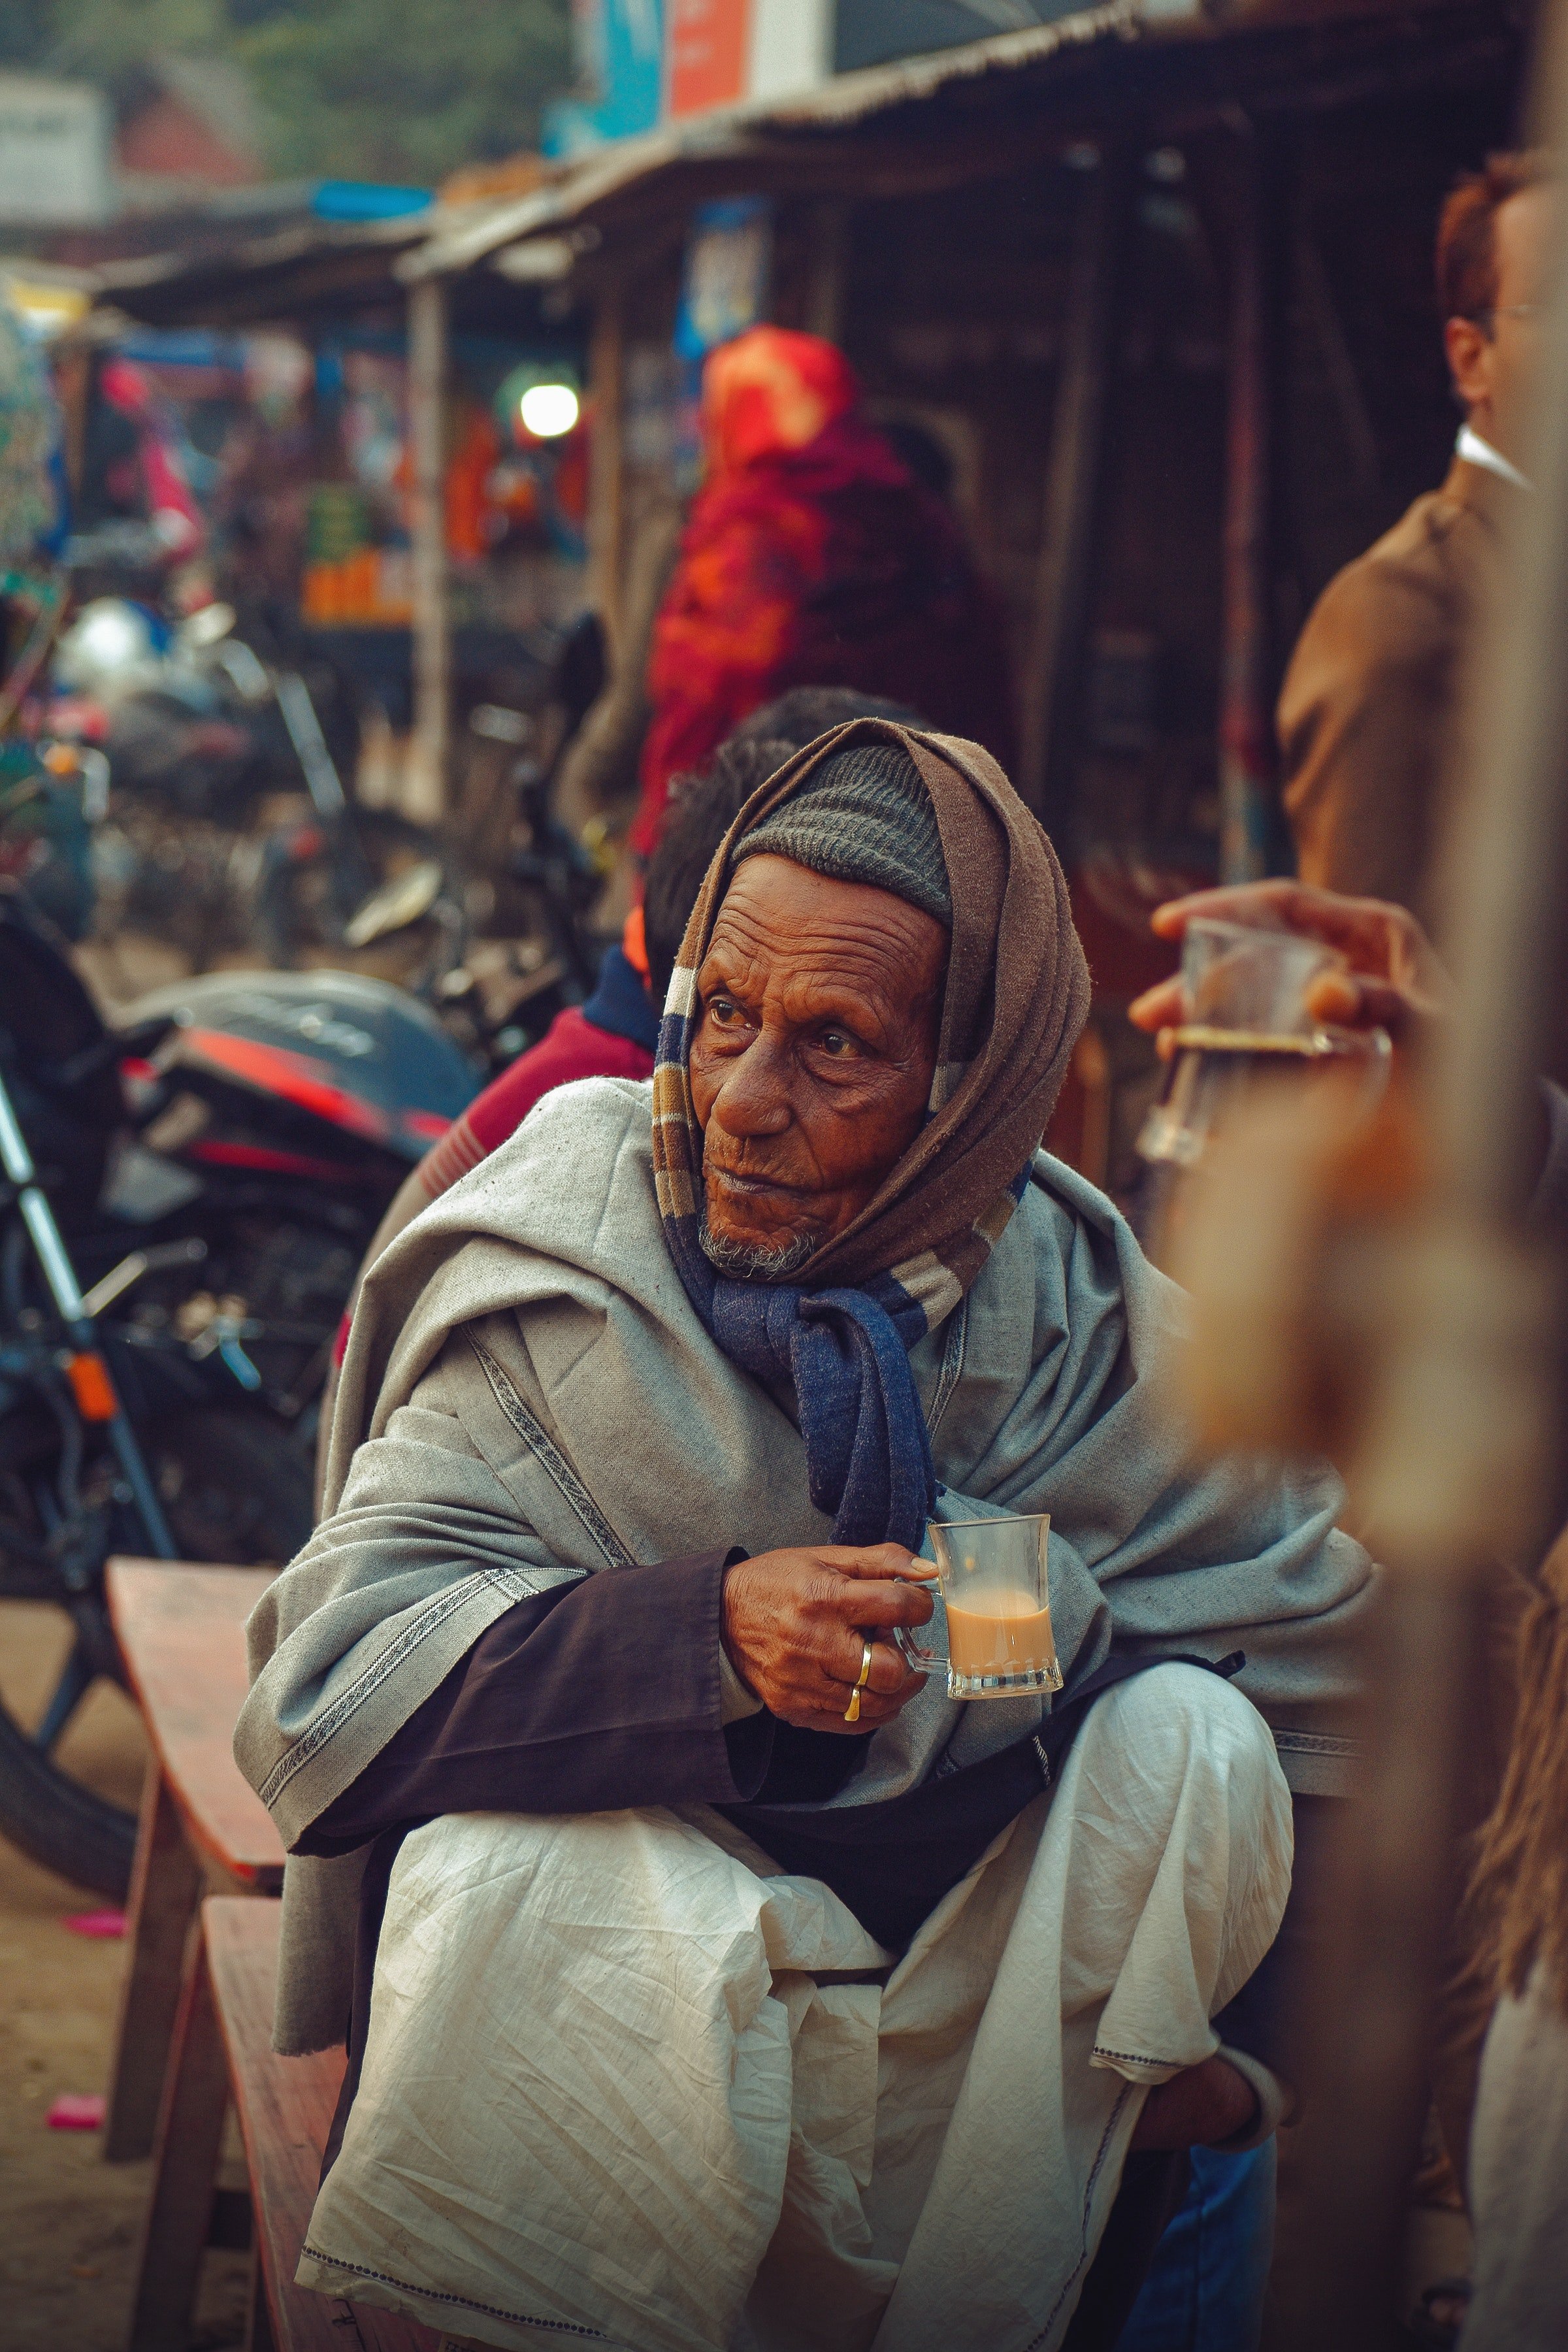 An old man offered Elizabeth to hold his cup of tea so she could keep warm. | Source: Pexels